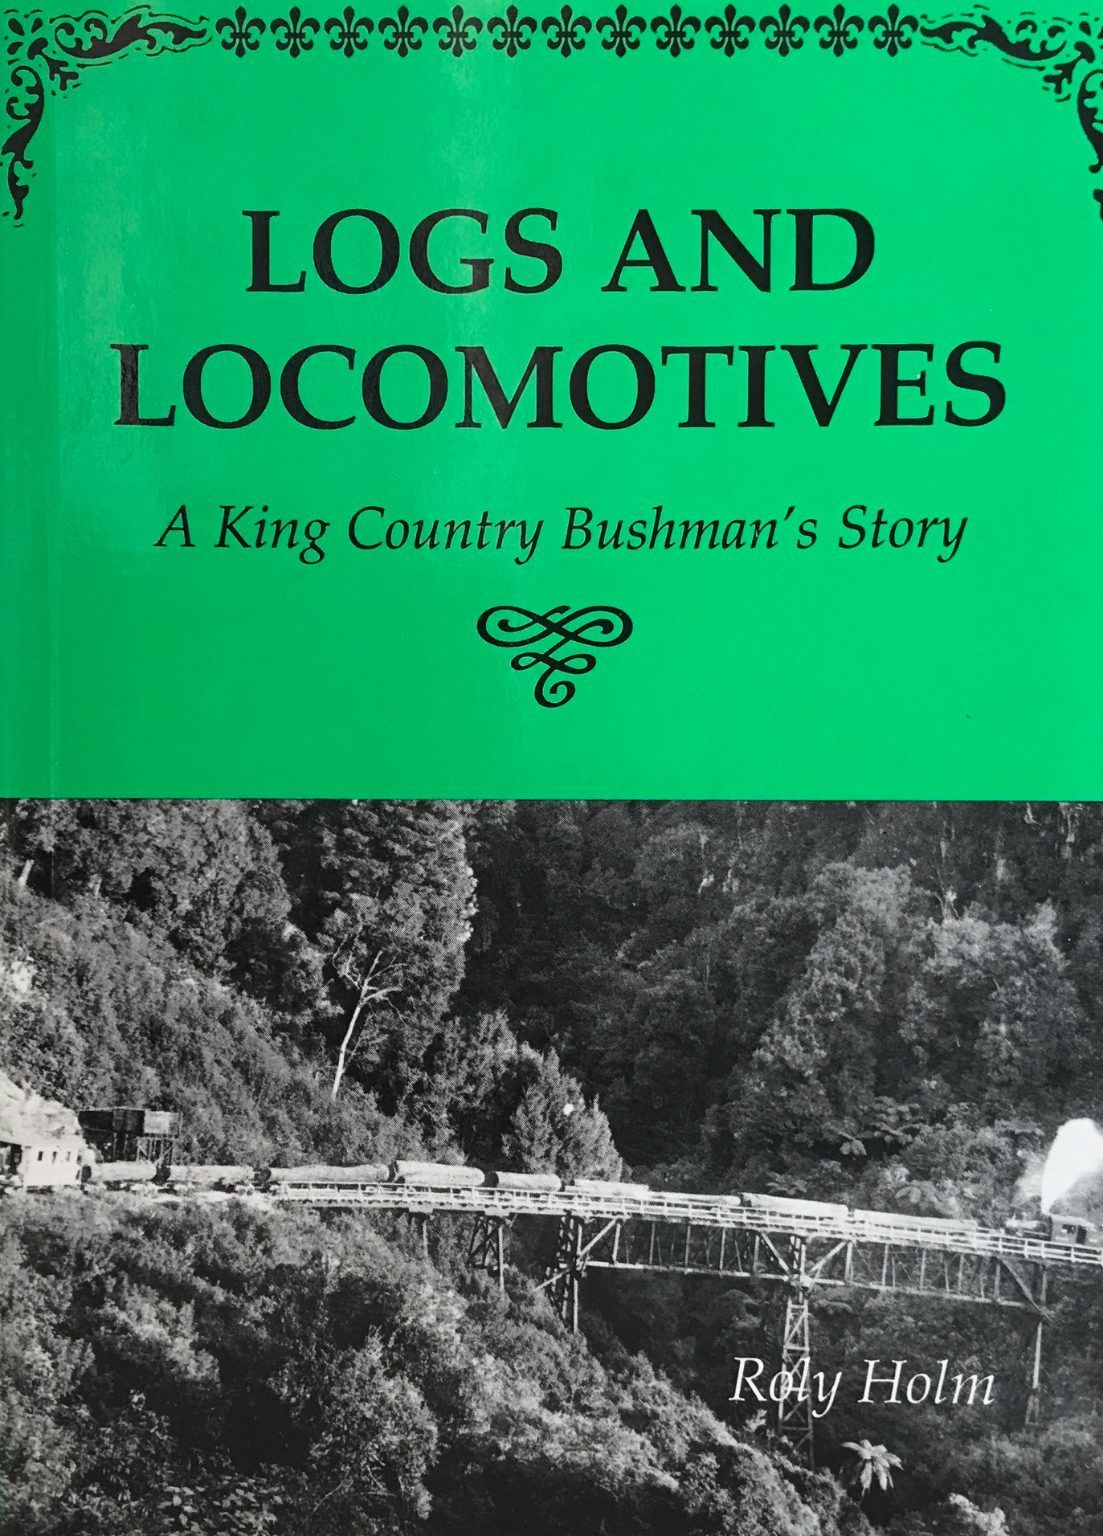 LOGS AND LOCOMOTIVES: A King Country Bushman's Story